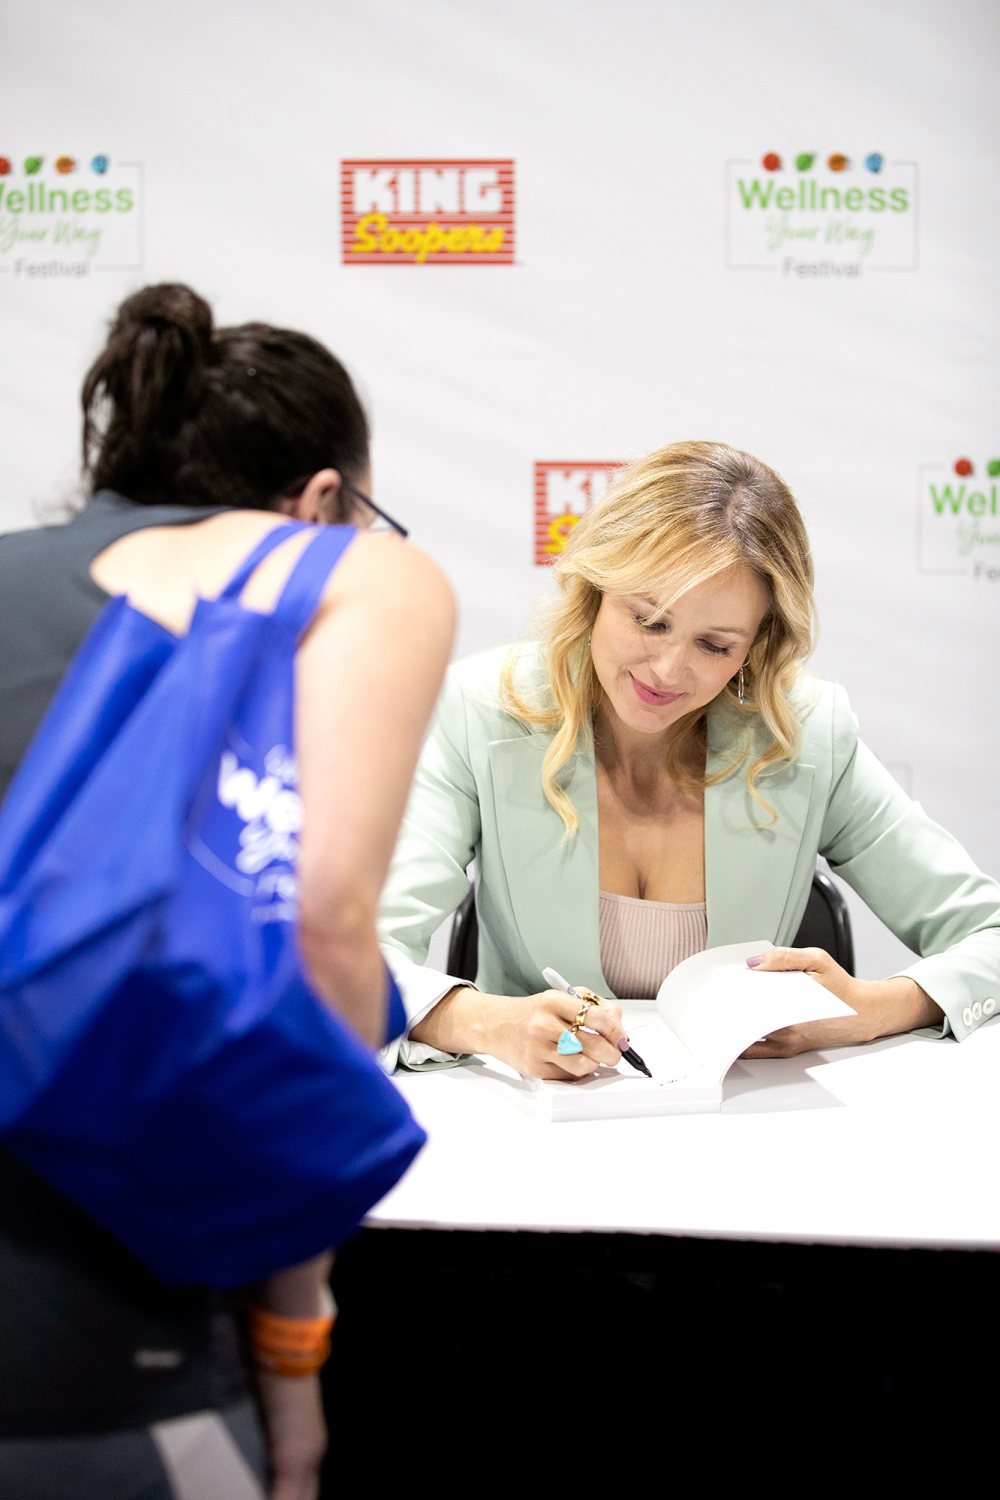 Jewel Attends Wellness Your Way Festival